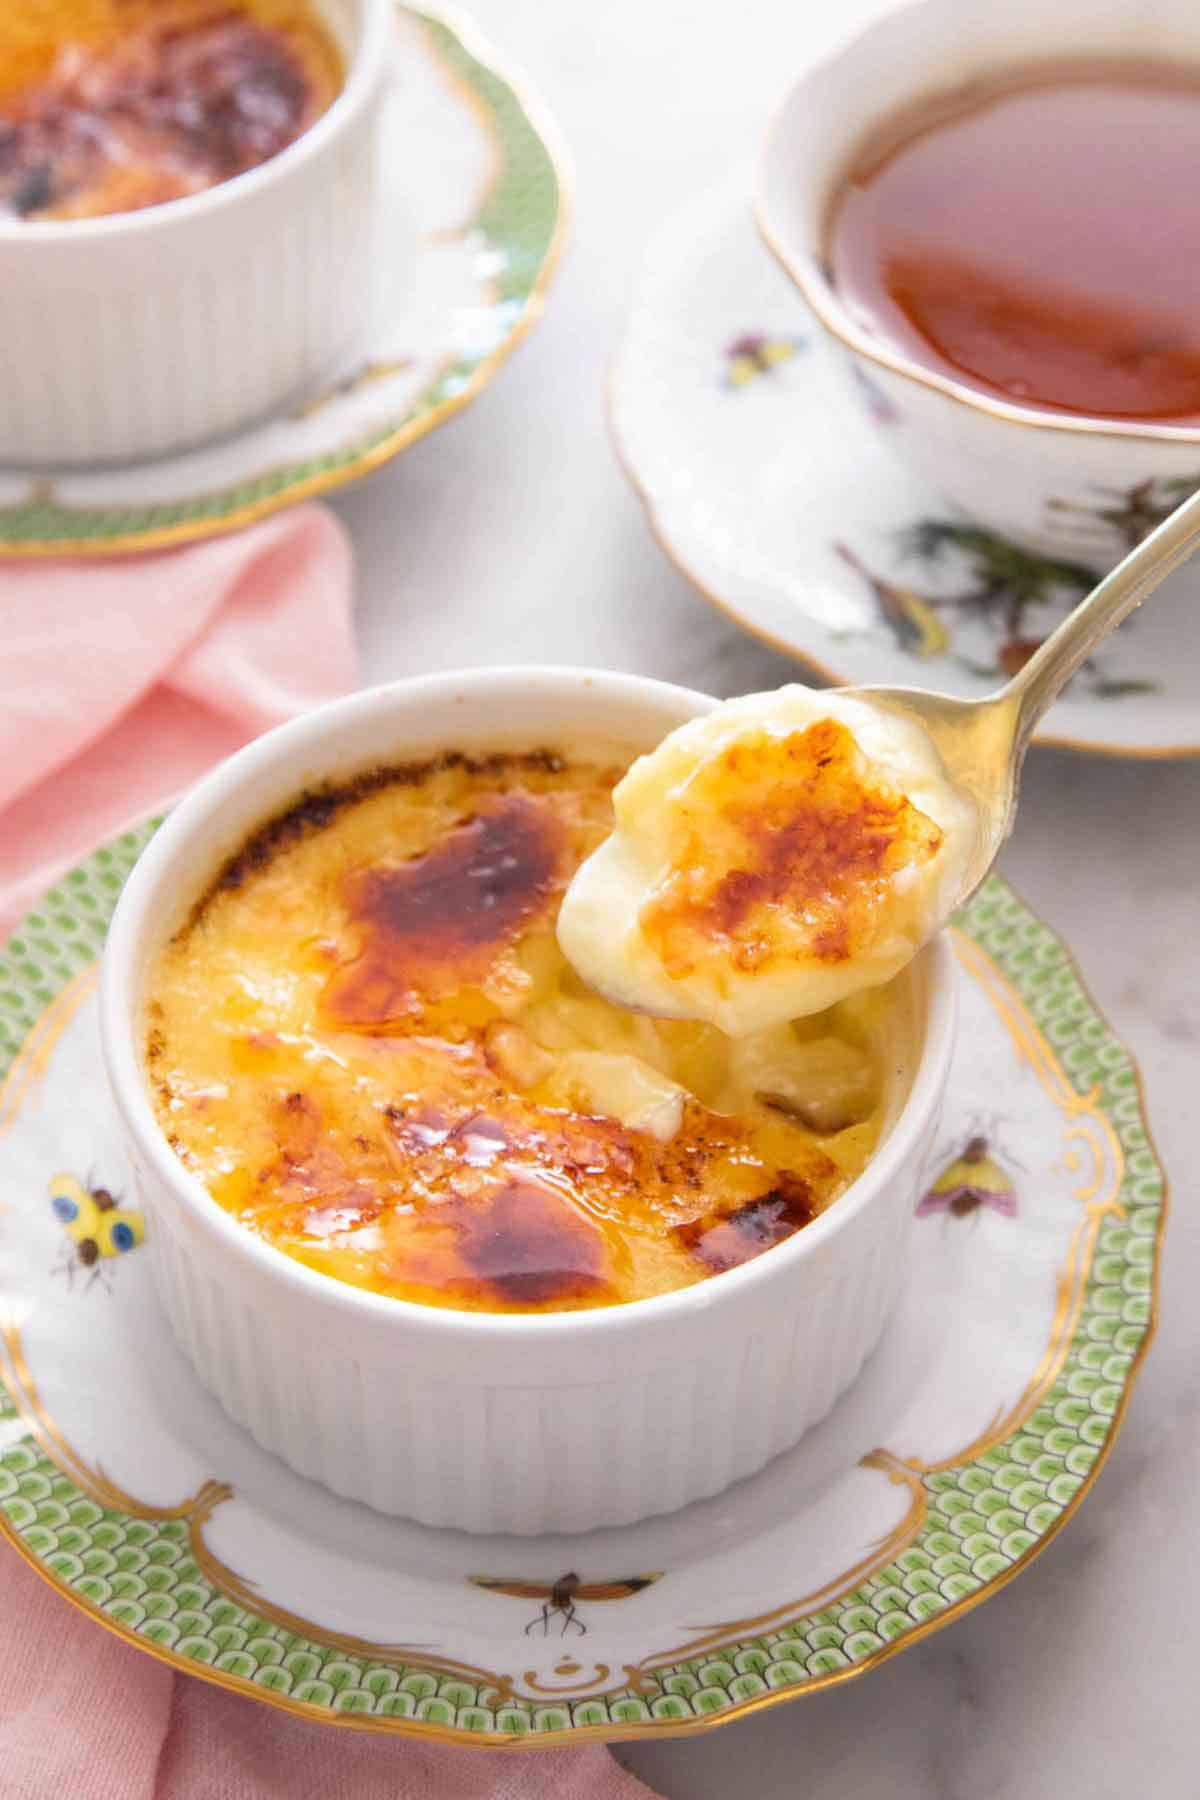 A spoonful of crème brûlée lifted from the ramekin with a cup of tea in the background.